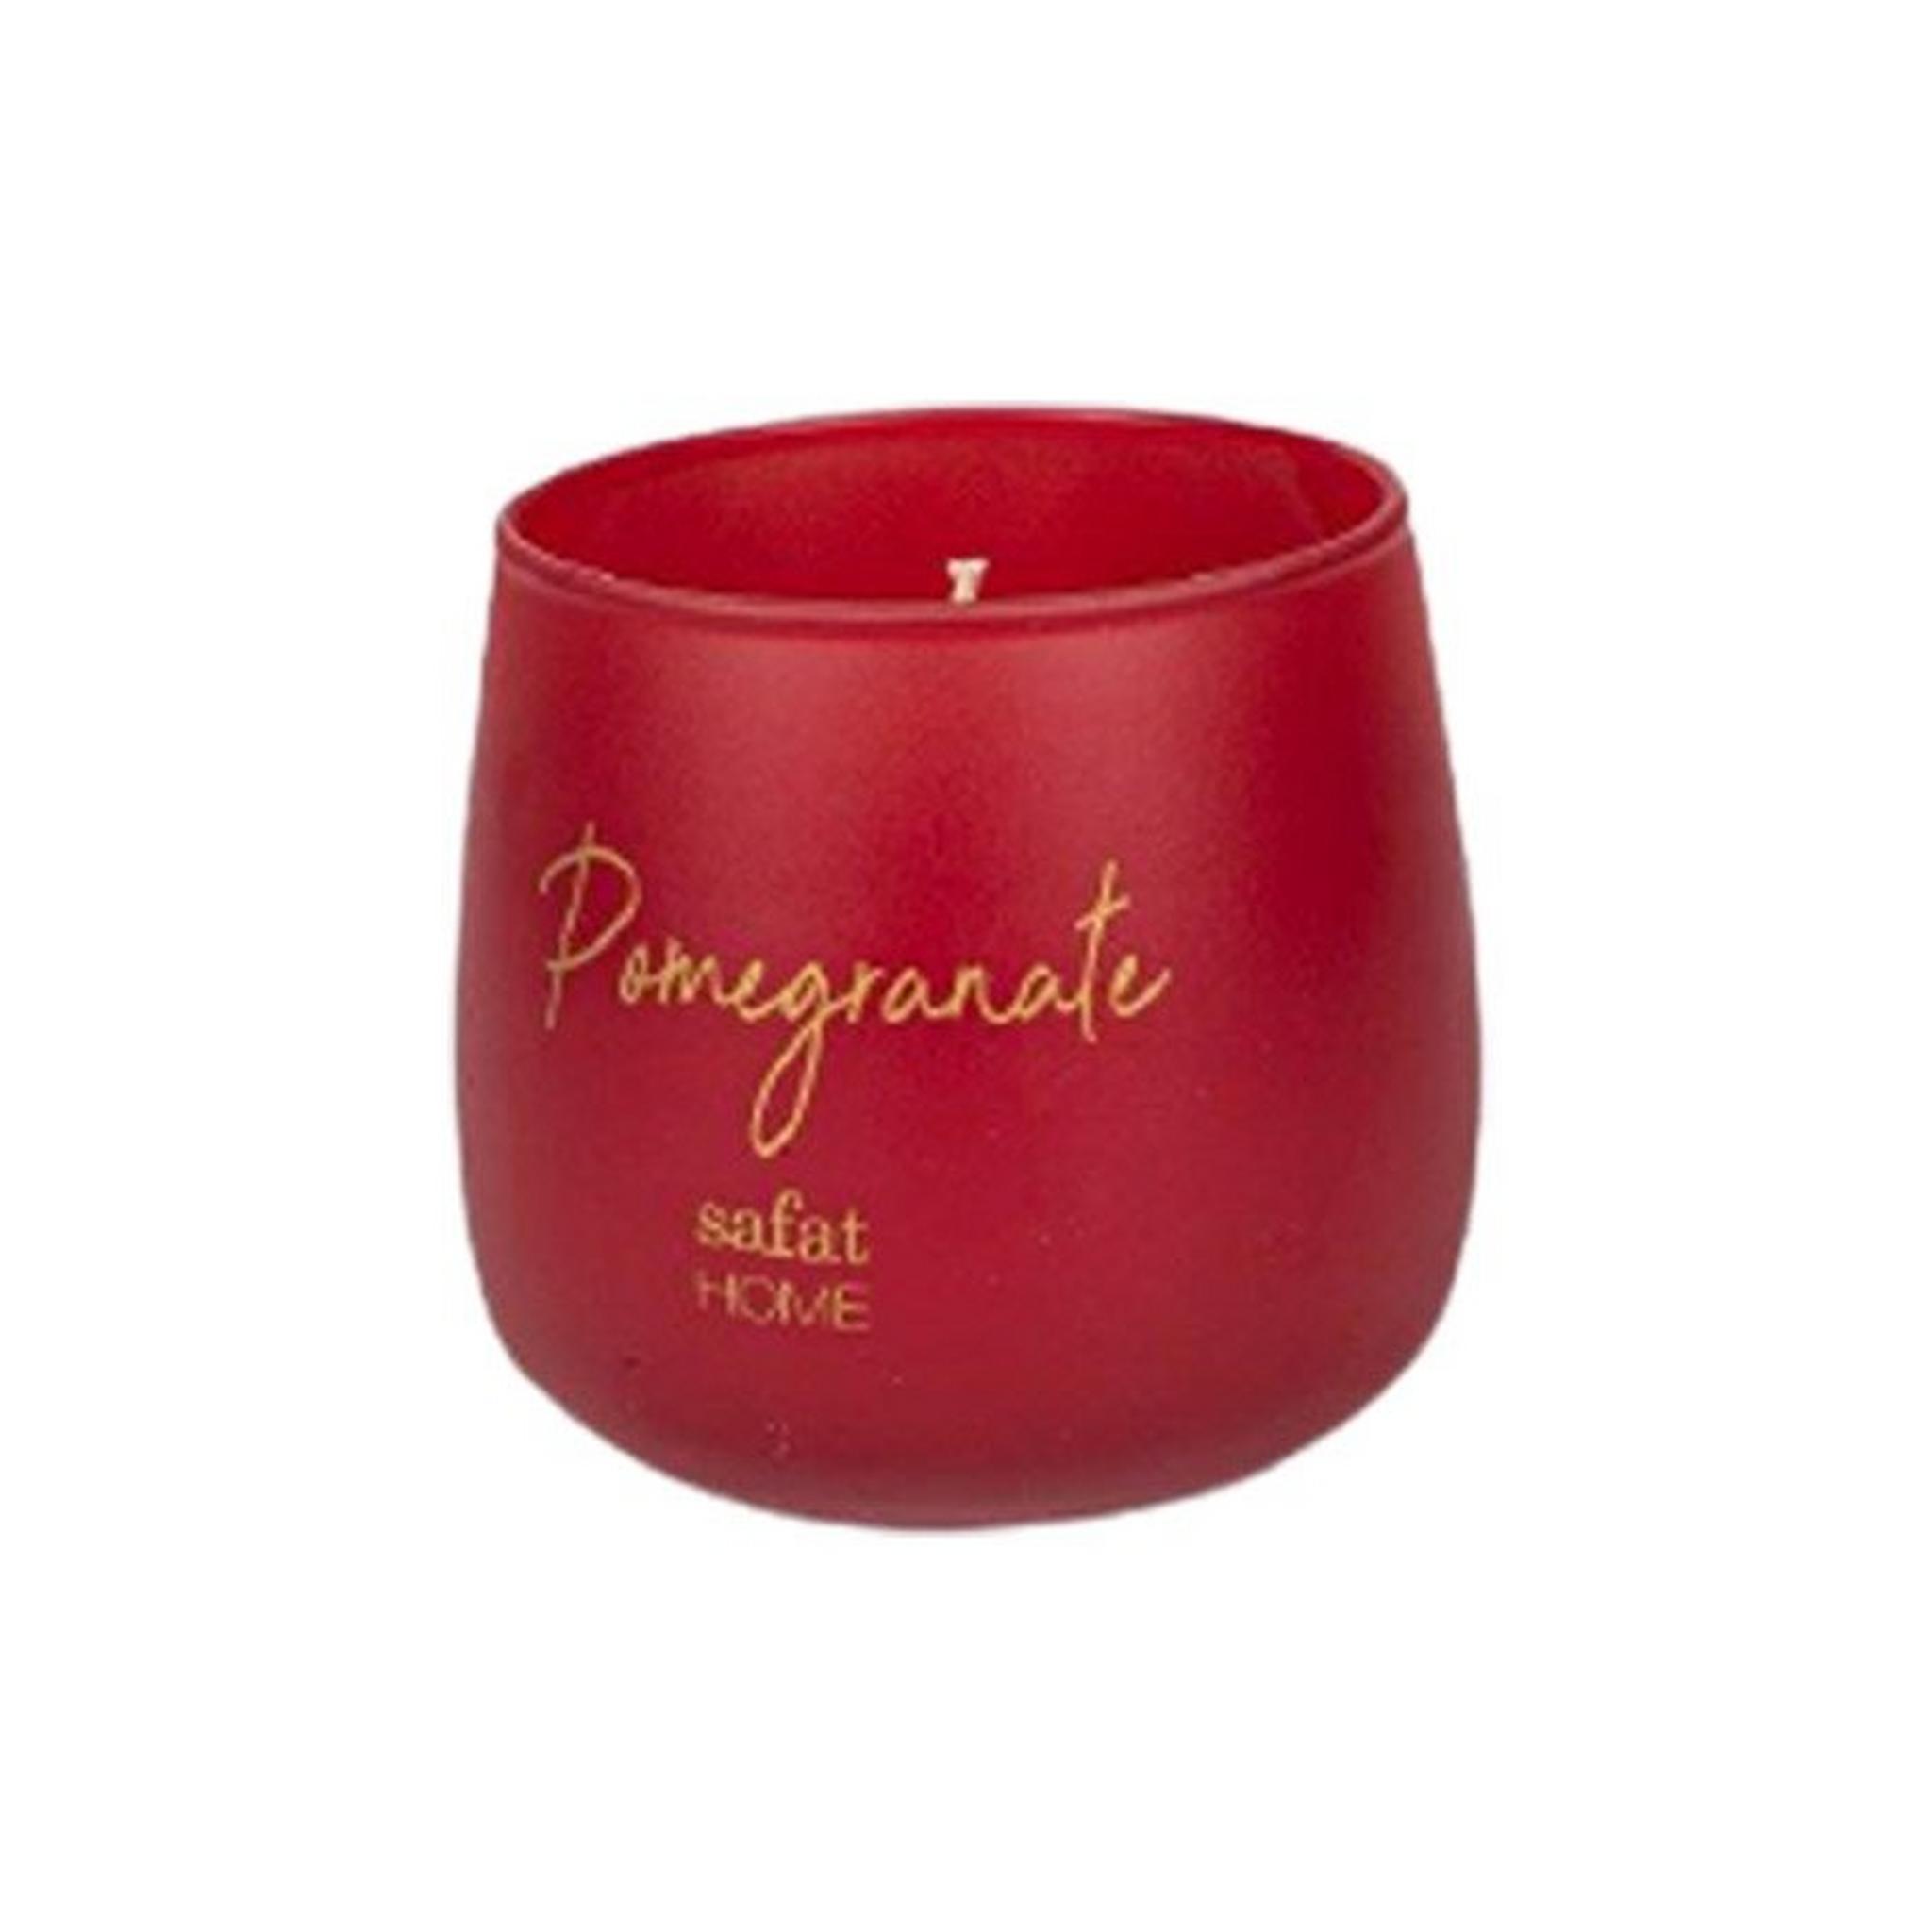 Pomegranate Candle 120g - Red